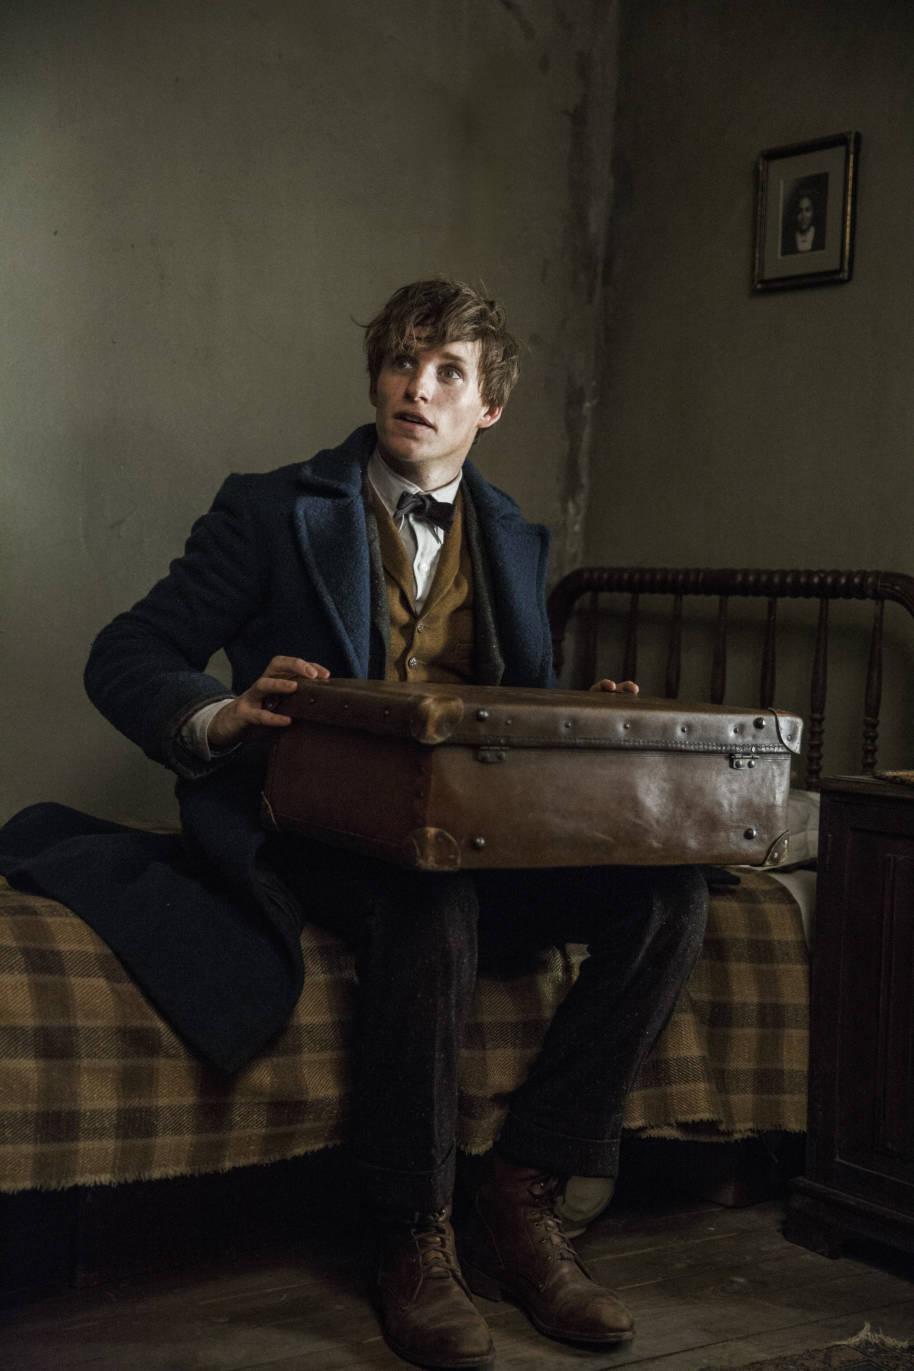 PMARCHIVE-FB WB Newt Scamander with Suitcase in Bedroom 52SG8GZadiEG2EoGOOMWcG-b1